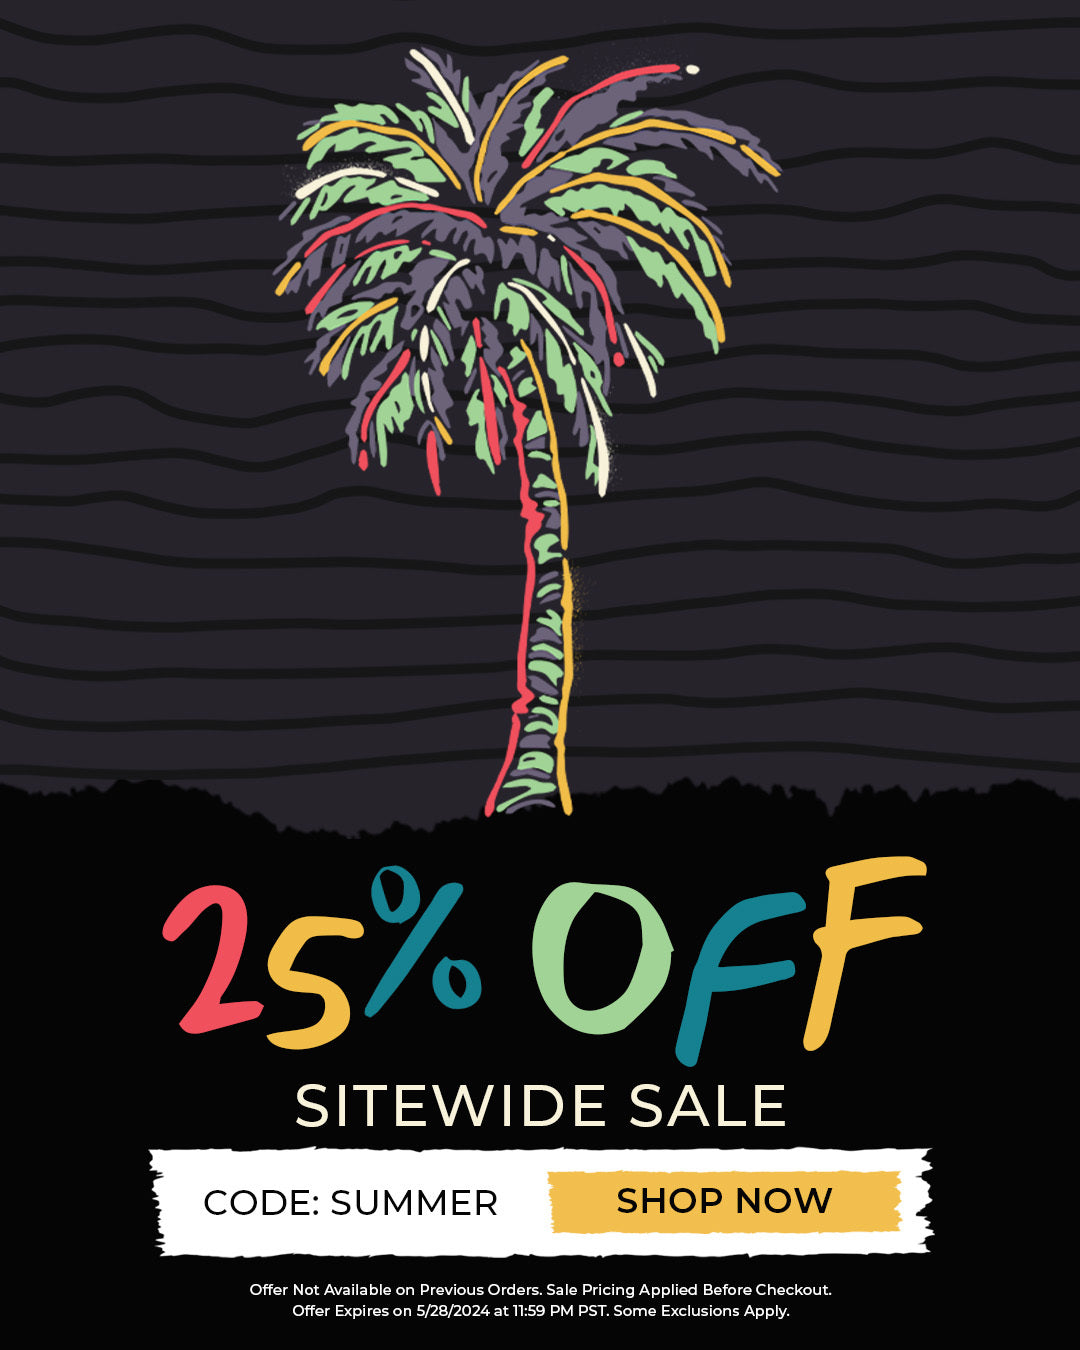 25% Off Sitewide Sale. Code SUMMER. Shop Now. Offer Not Available on Previous Orders. Sale Pricing Applied Before Checkout. Offer Expires on 5/28/2024 at 11:59 PM PST. Some Exclusions Apply.